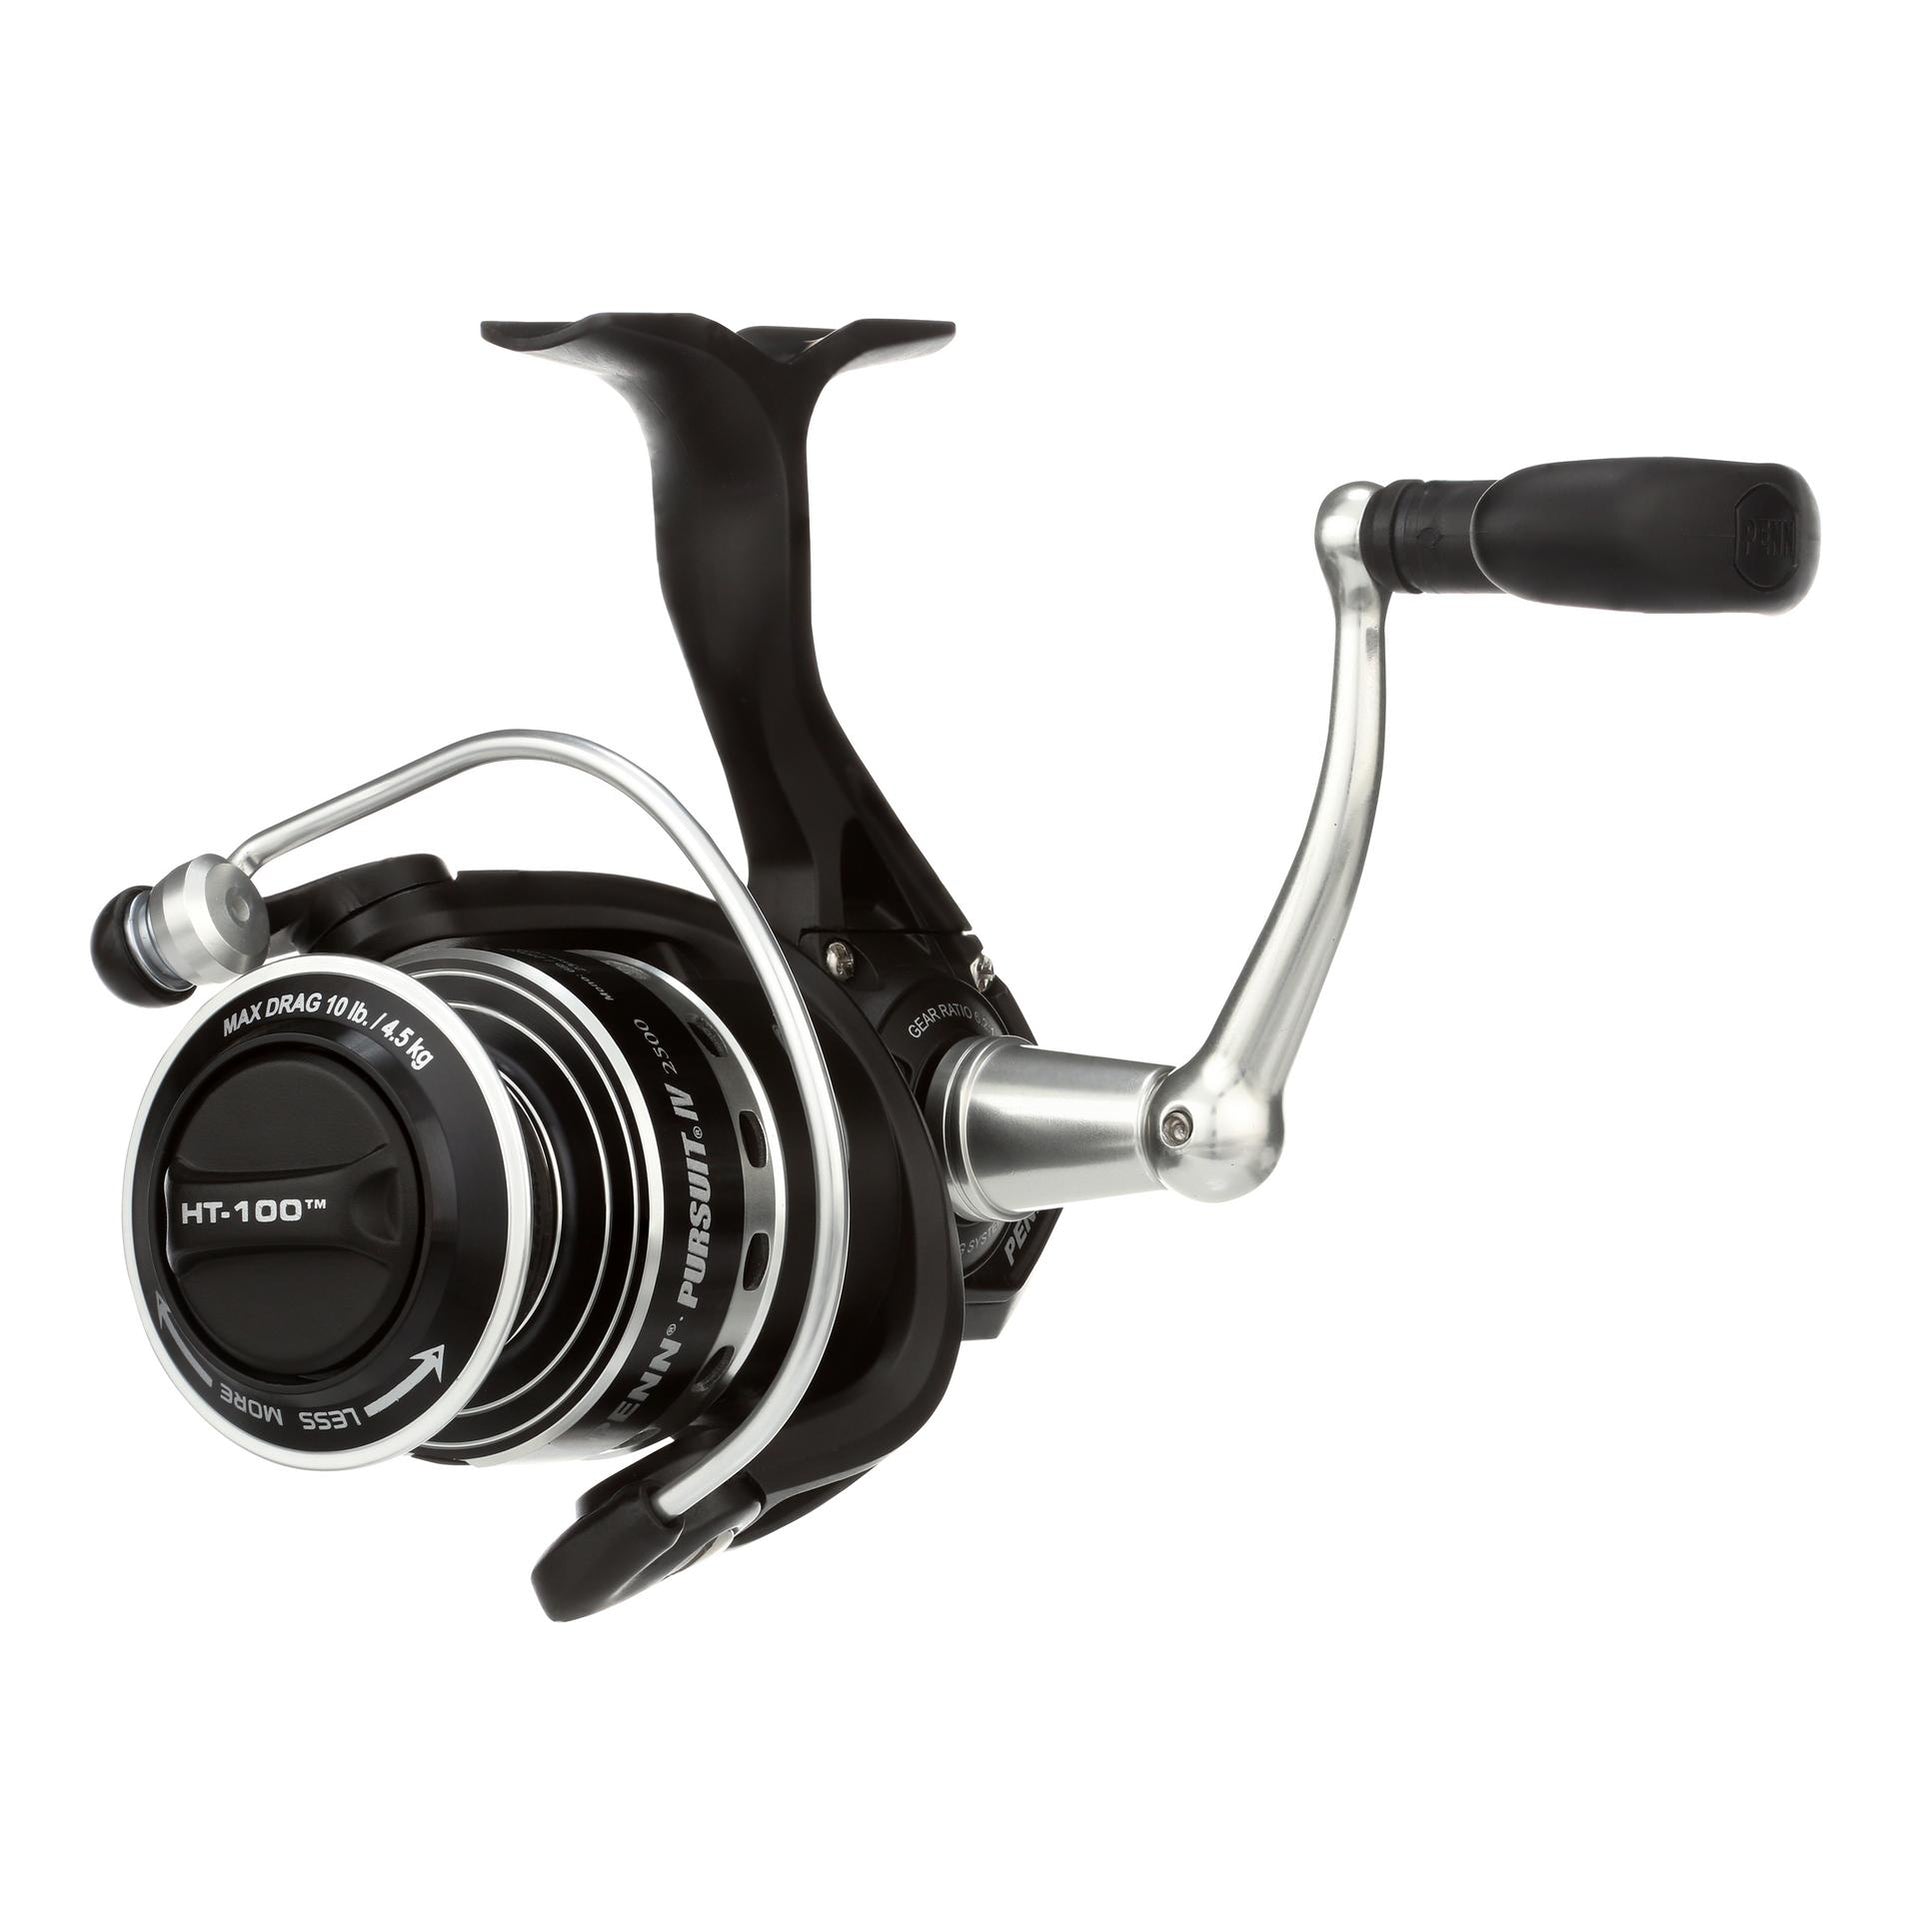 NEW PENN pursuit IV LE rod/reel combo PRICE REDUCED - sporting